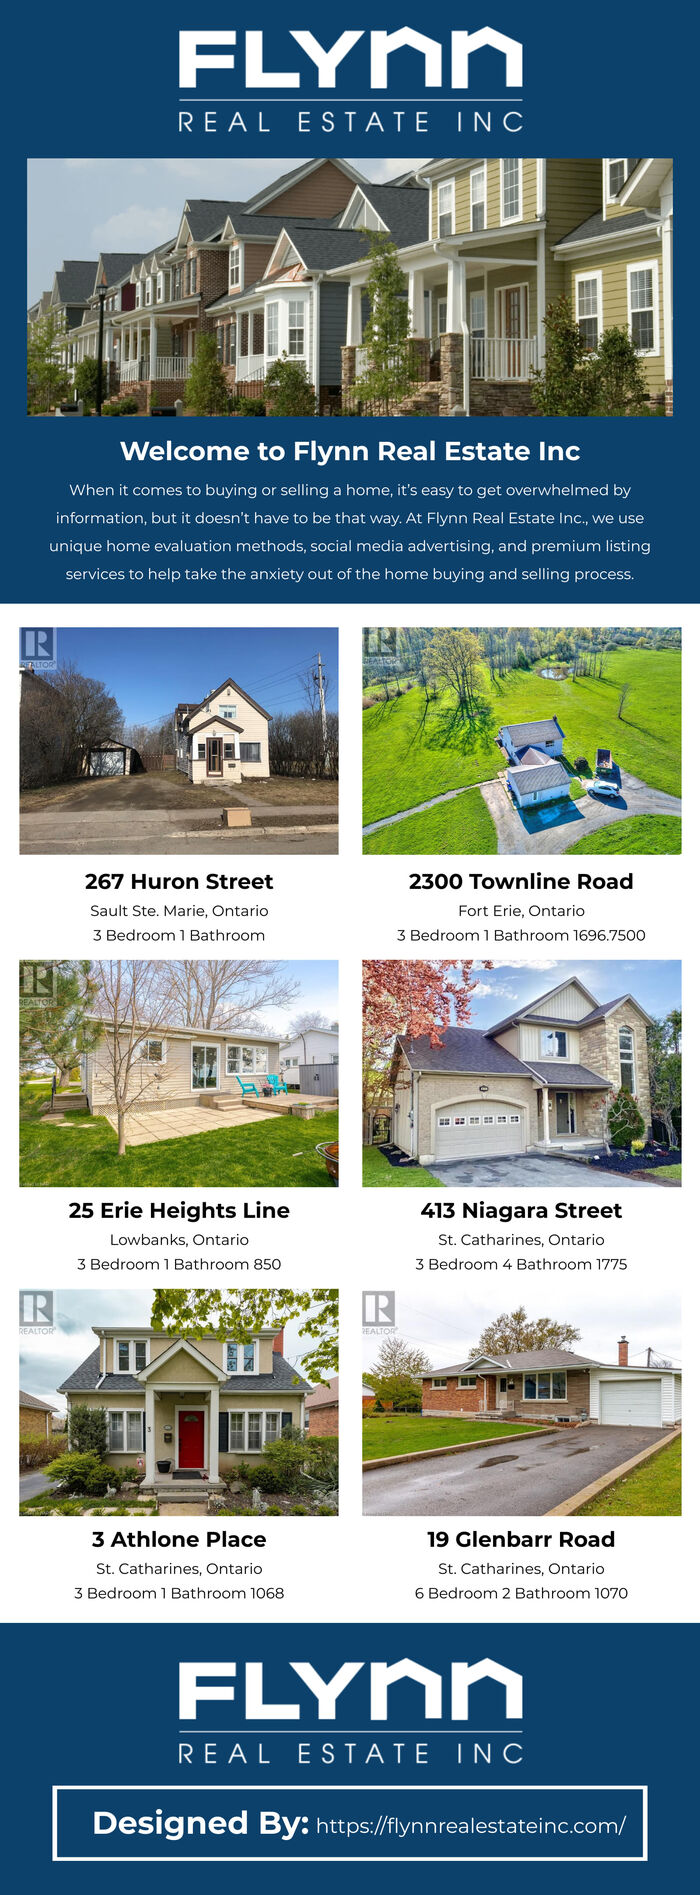 This infographic is designed by Flynn Real Estate